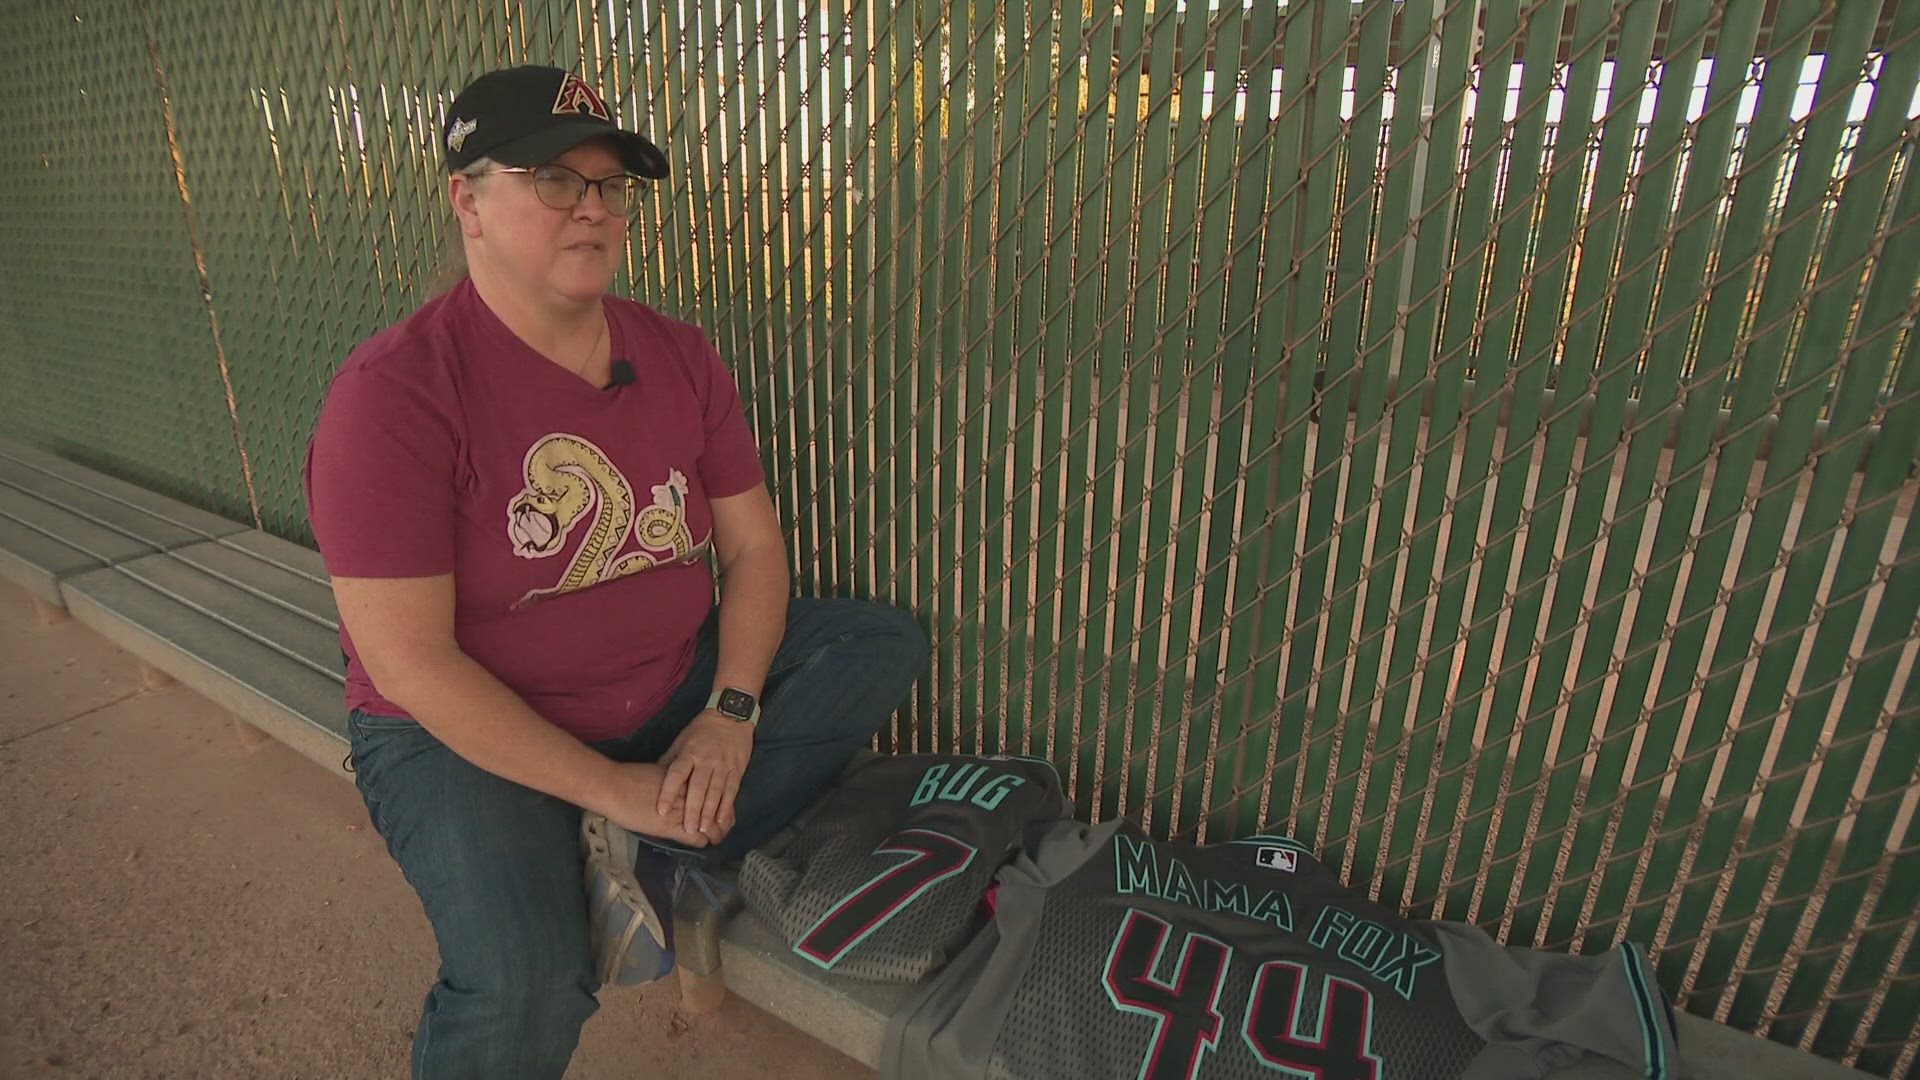 Crys Melton told 12News she last saw the jersey on Sunday at Chase Field during the D-Backs' game against the Houston Astros.